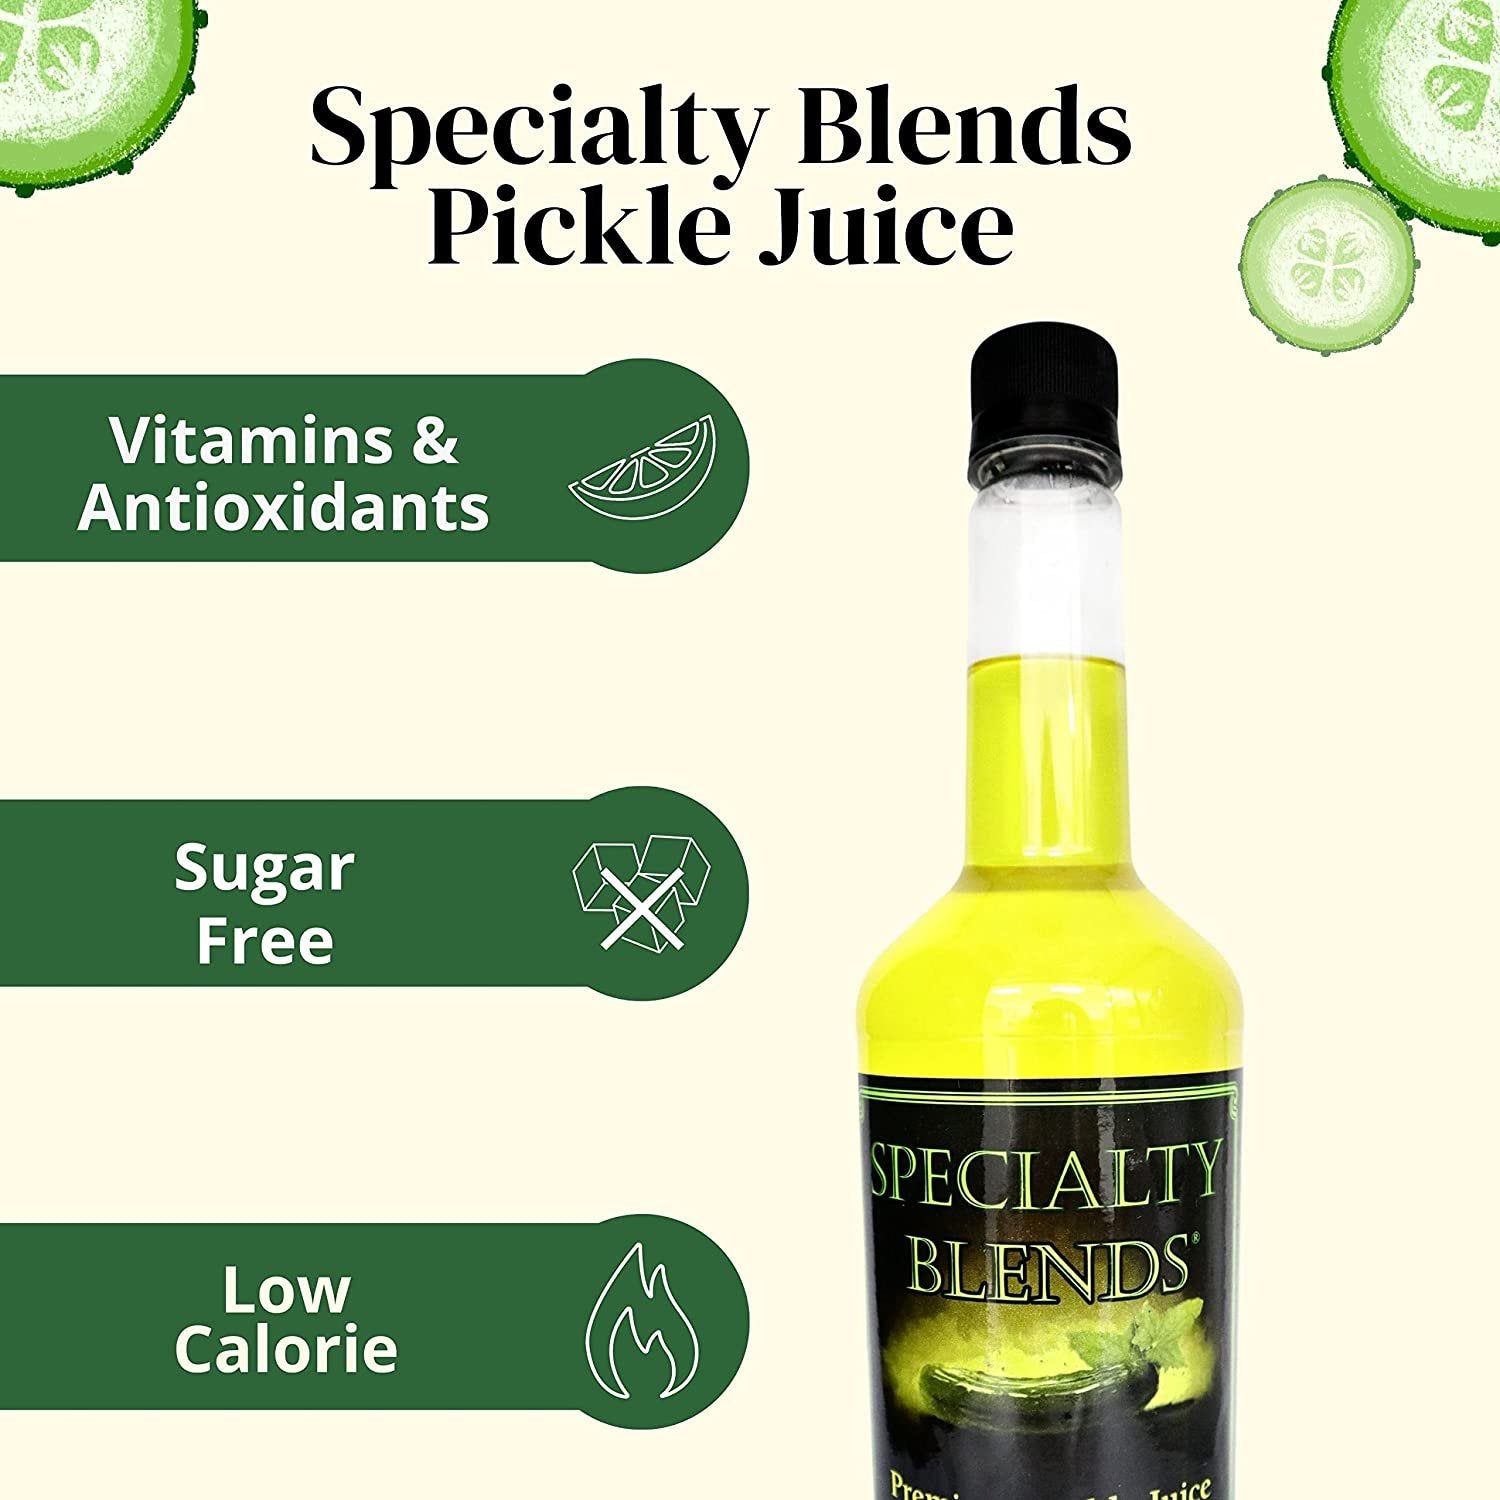 Specialty Blends Pickle Juice - Premium Pickle Juice for Leg Cramps, Freeze Pops, Drink Mixer, Gluten Free, Keto Friendly, Natural Electrolyte (1 Pack) 1L with Bonus Key Chain